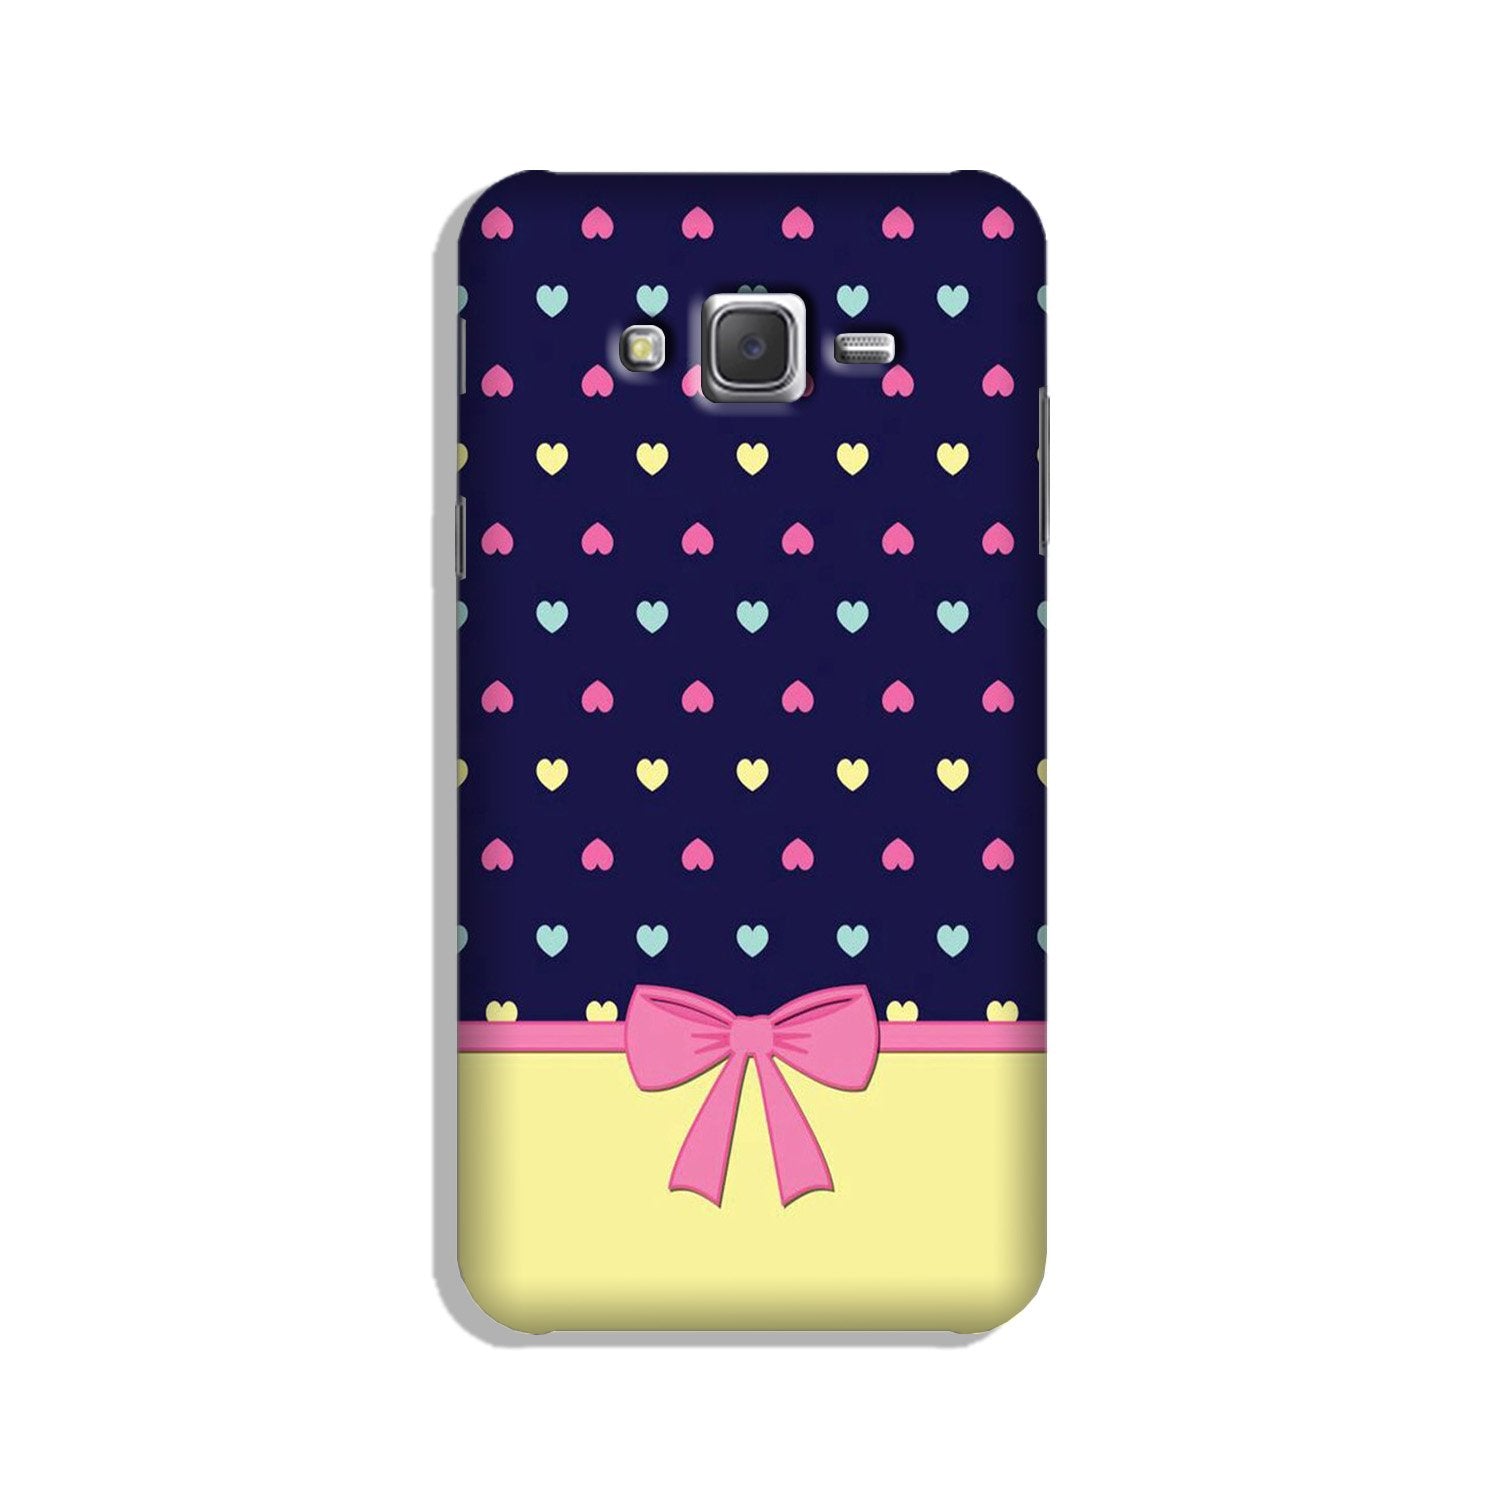 Gift Wrap5 Case for Galaxy J5 (2015)